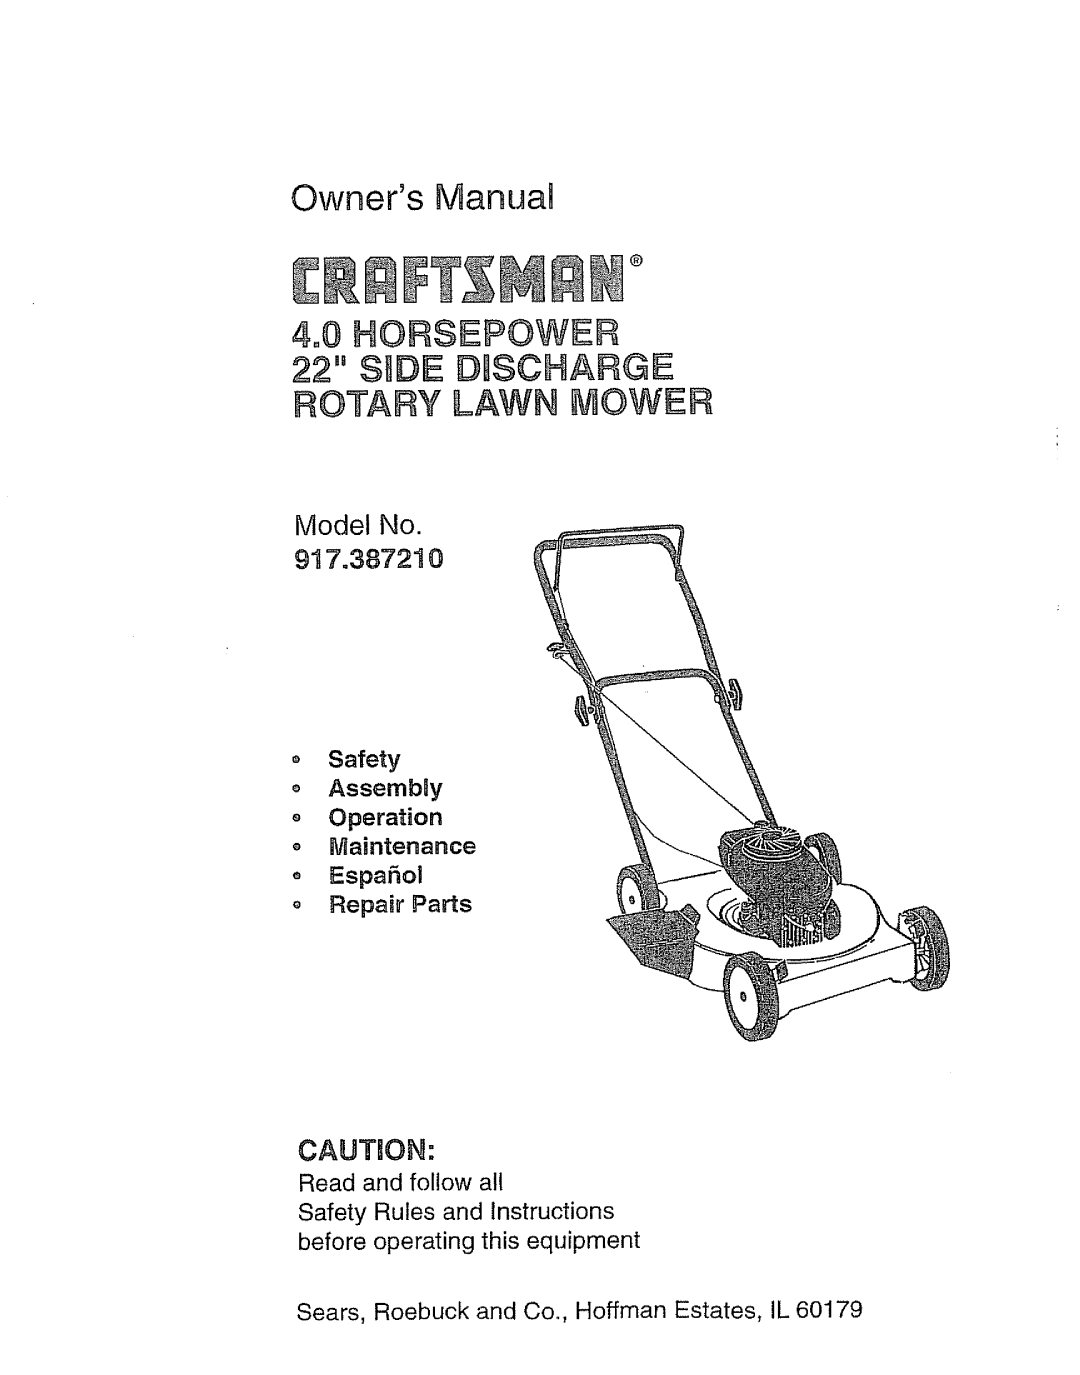 Craftsman 917.38721 owner manual HORSEPOWER 22 SIDE DmSOHARGE, ROTARY LAWN ItOWER, Model No, o Repair Parts, Cautron 